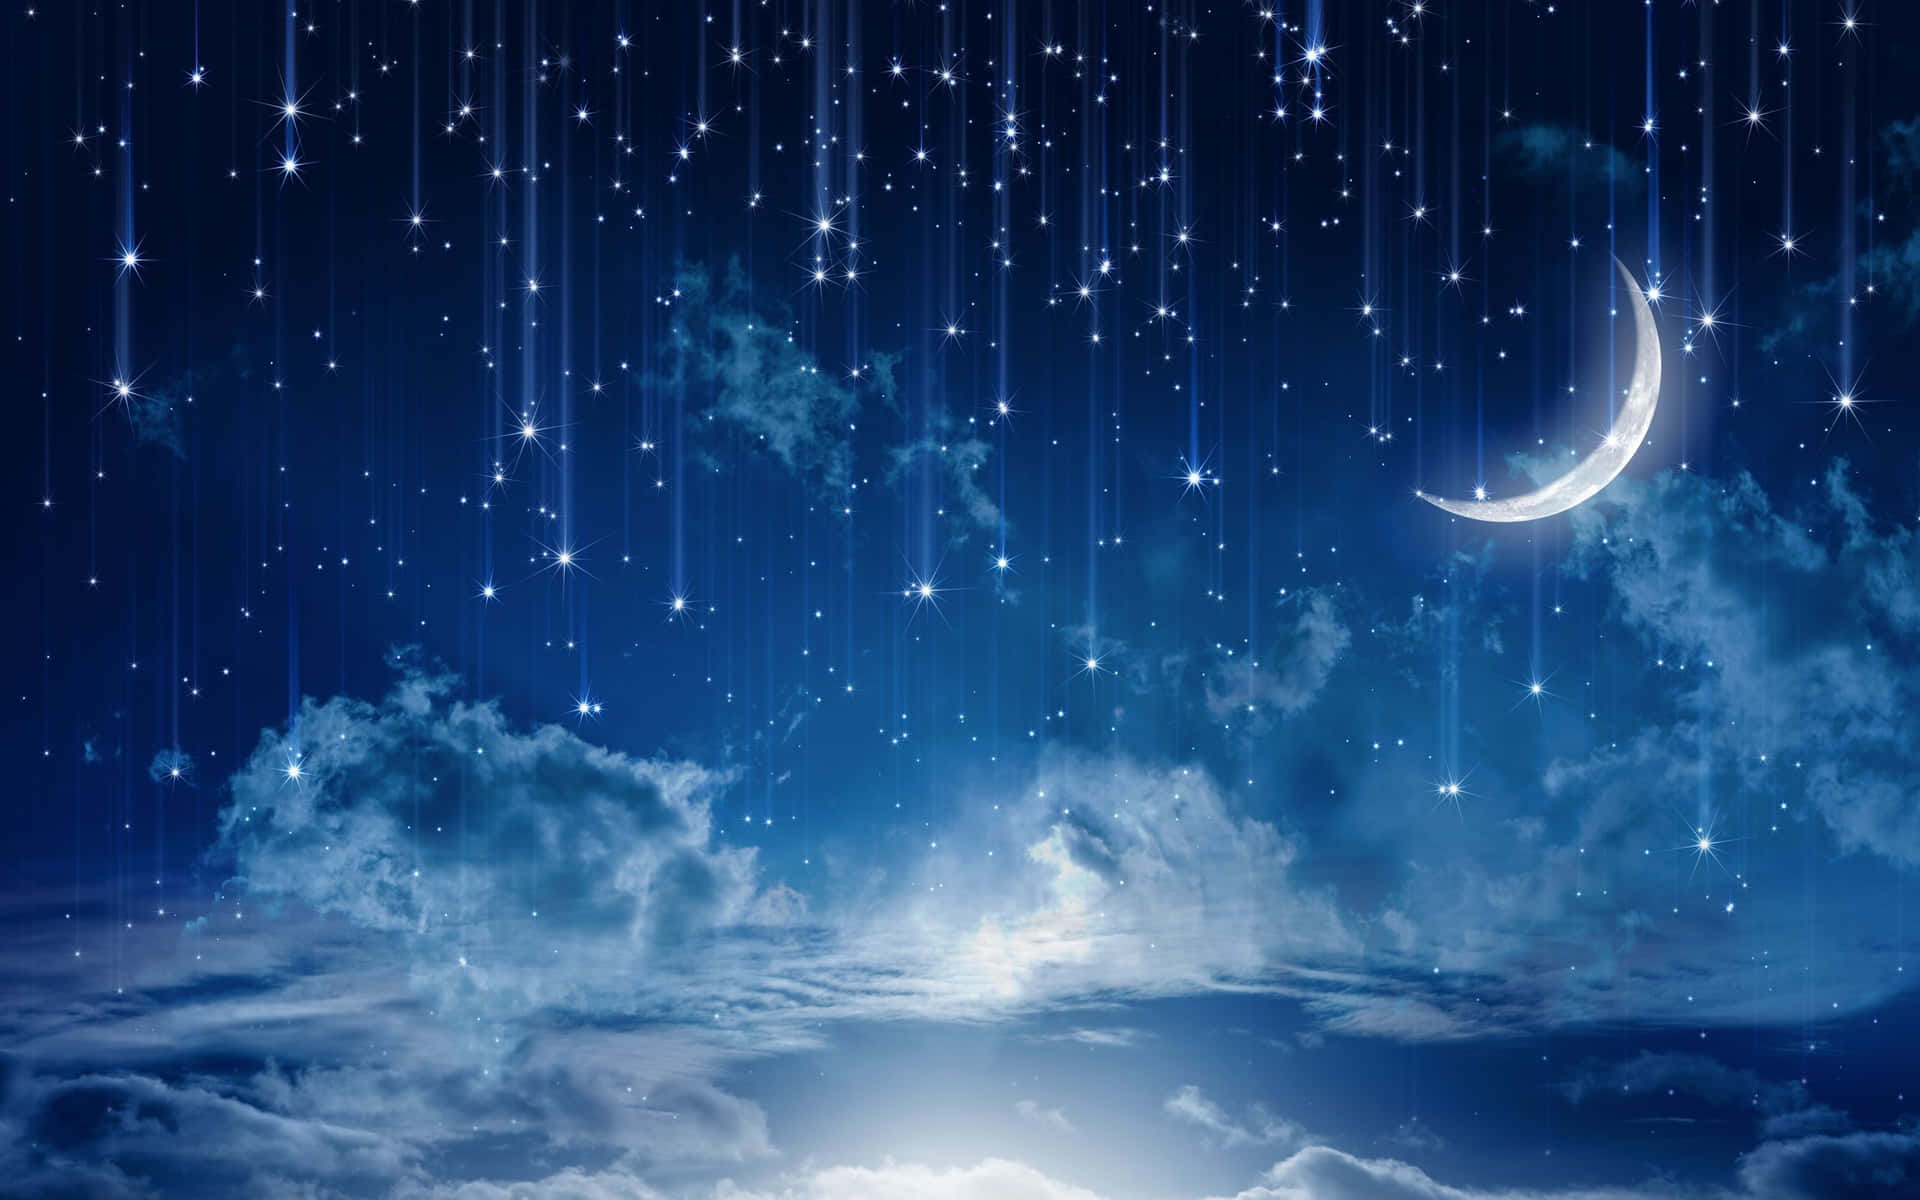 Magical Night Sky With Crescent Moon And Many Falling Stars Background